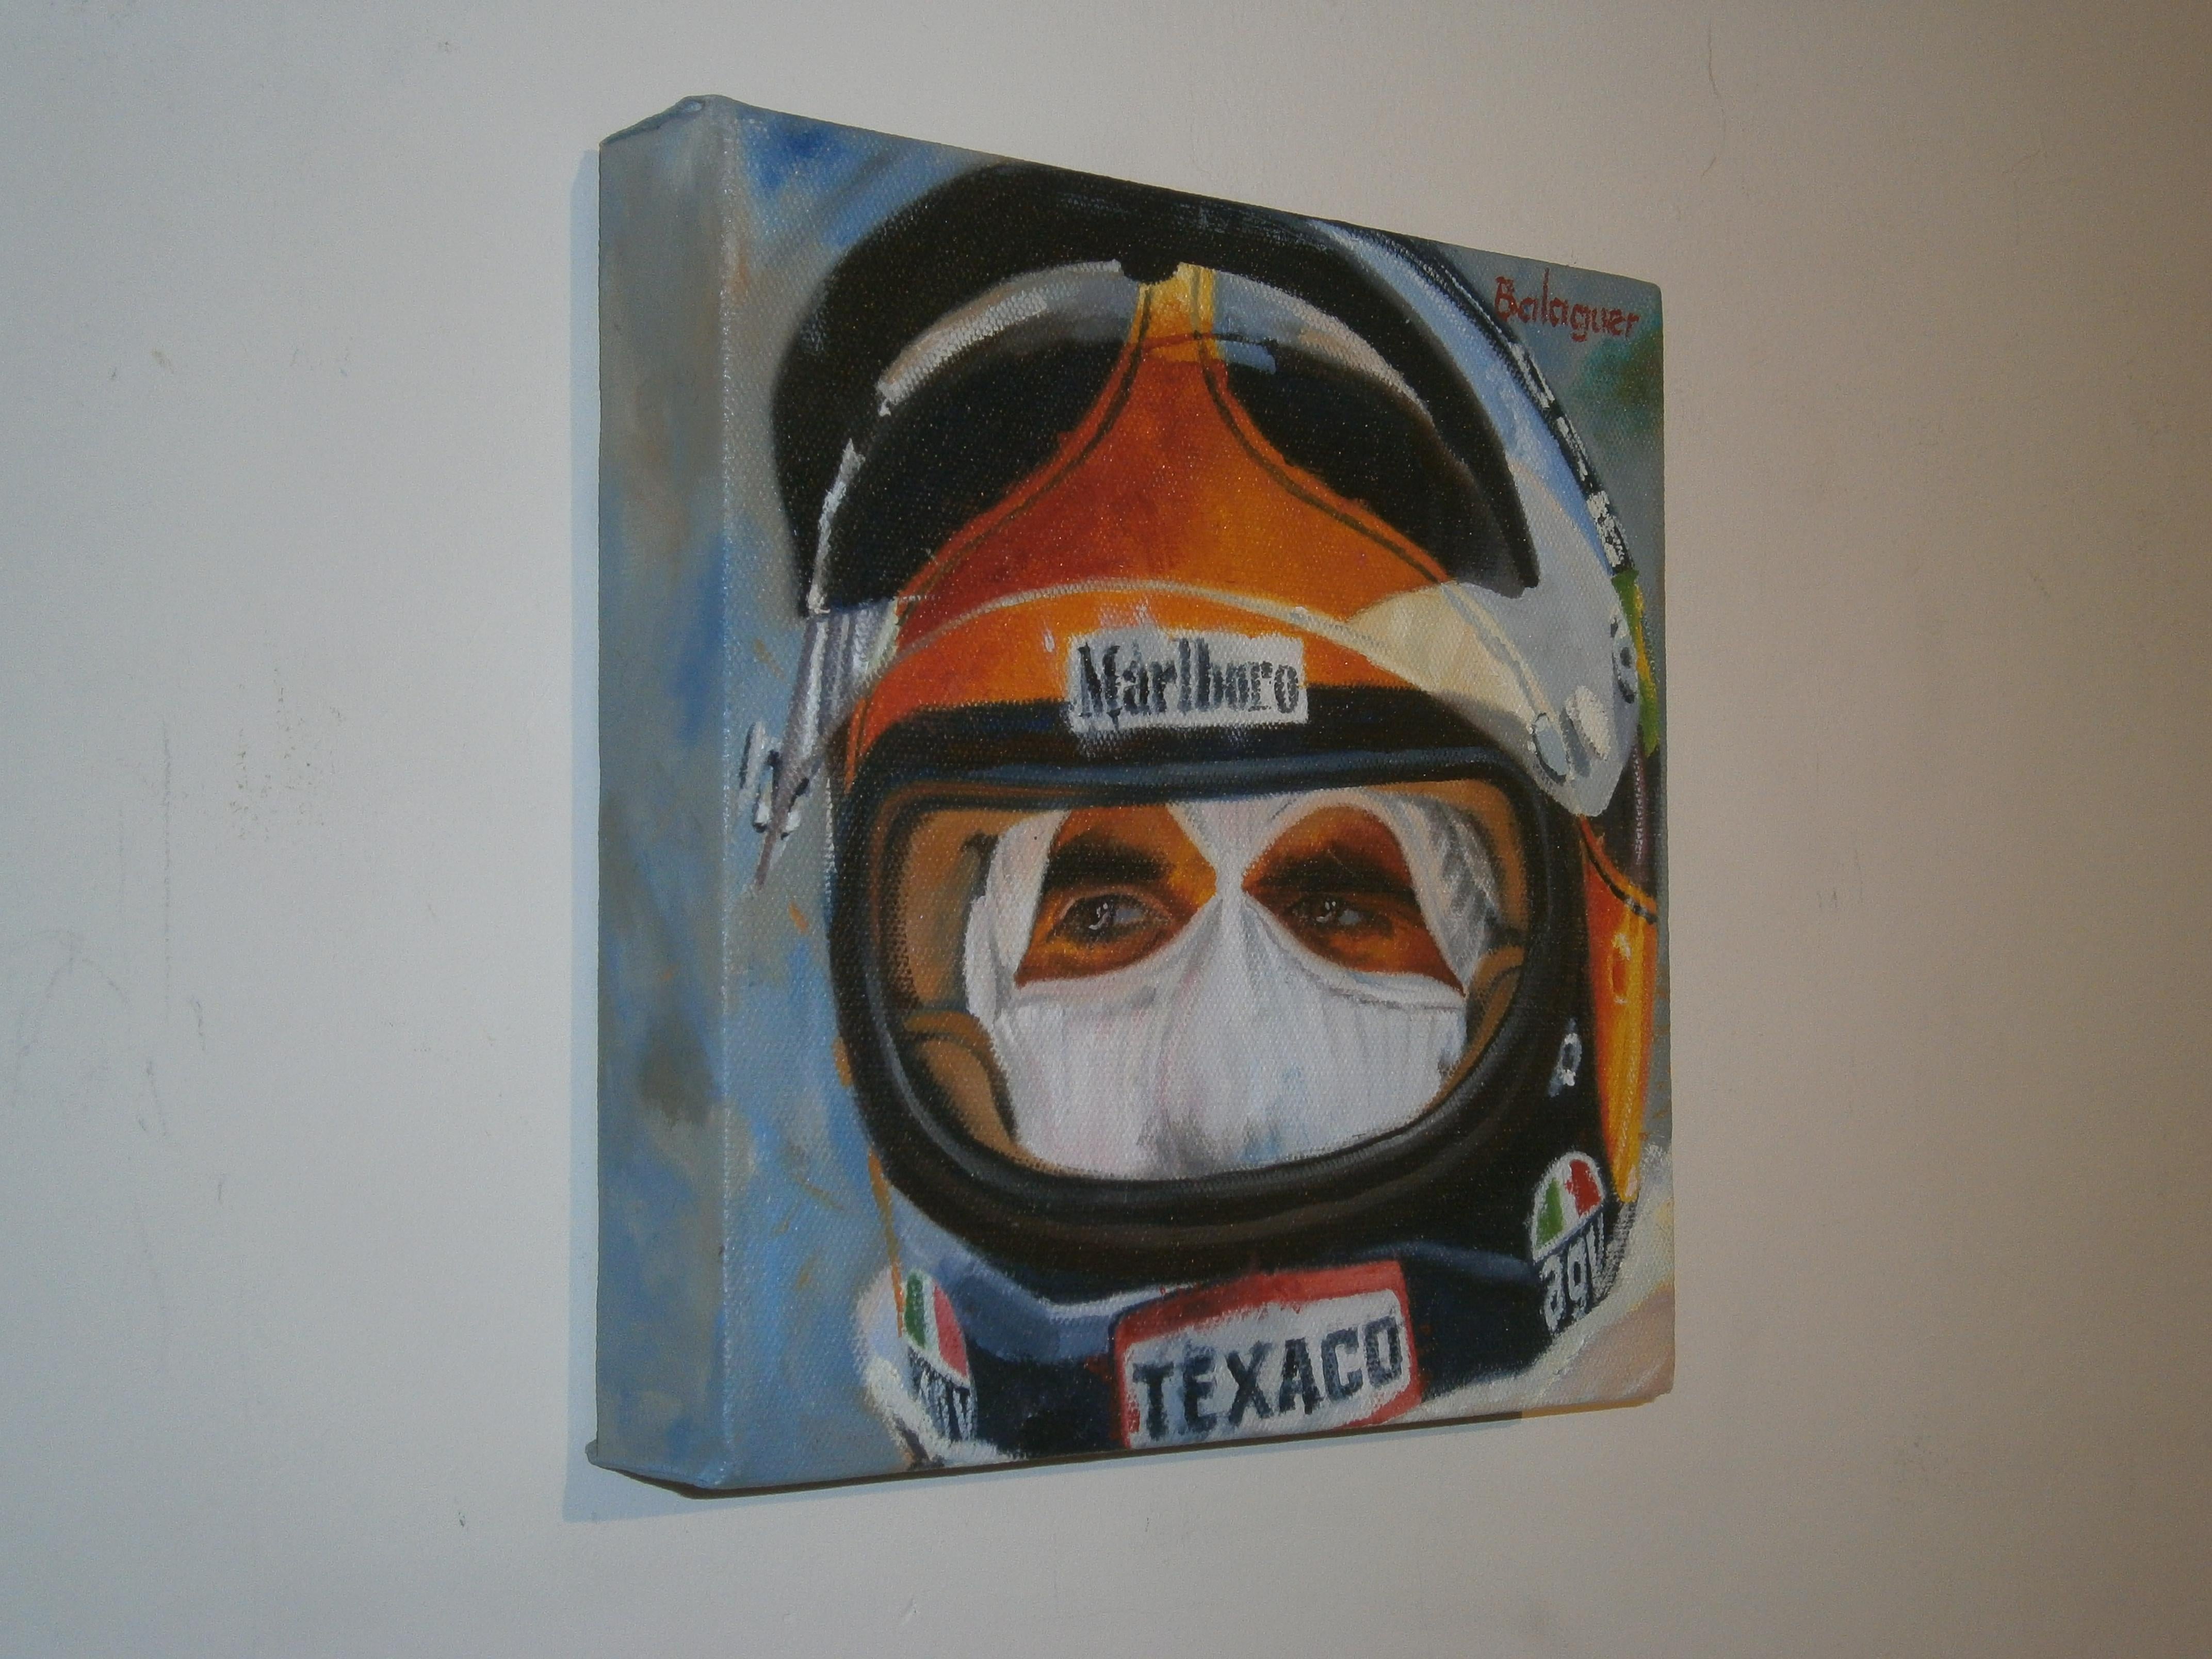 Balaguer  Car Races   Emerson Fittipaldi    orig. acrylic - Painting by Alex BALAGUER